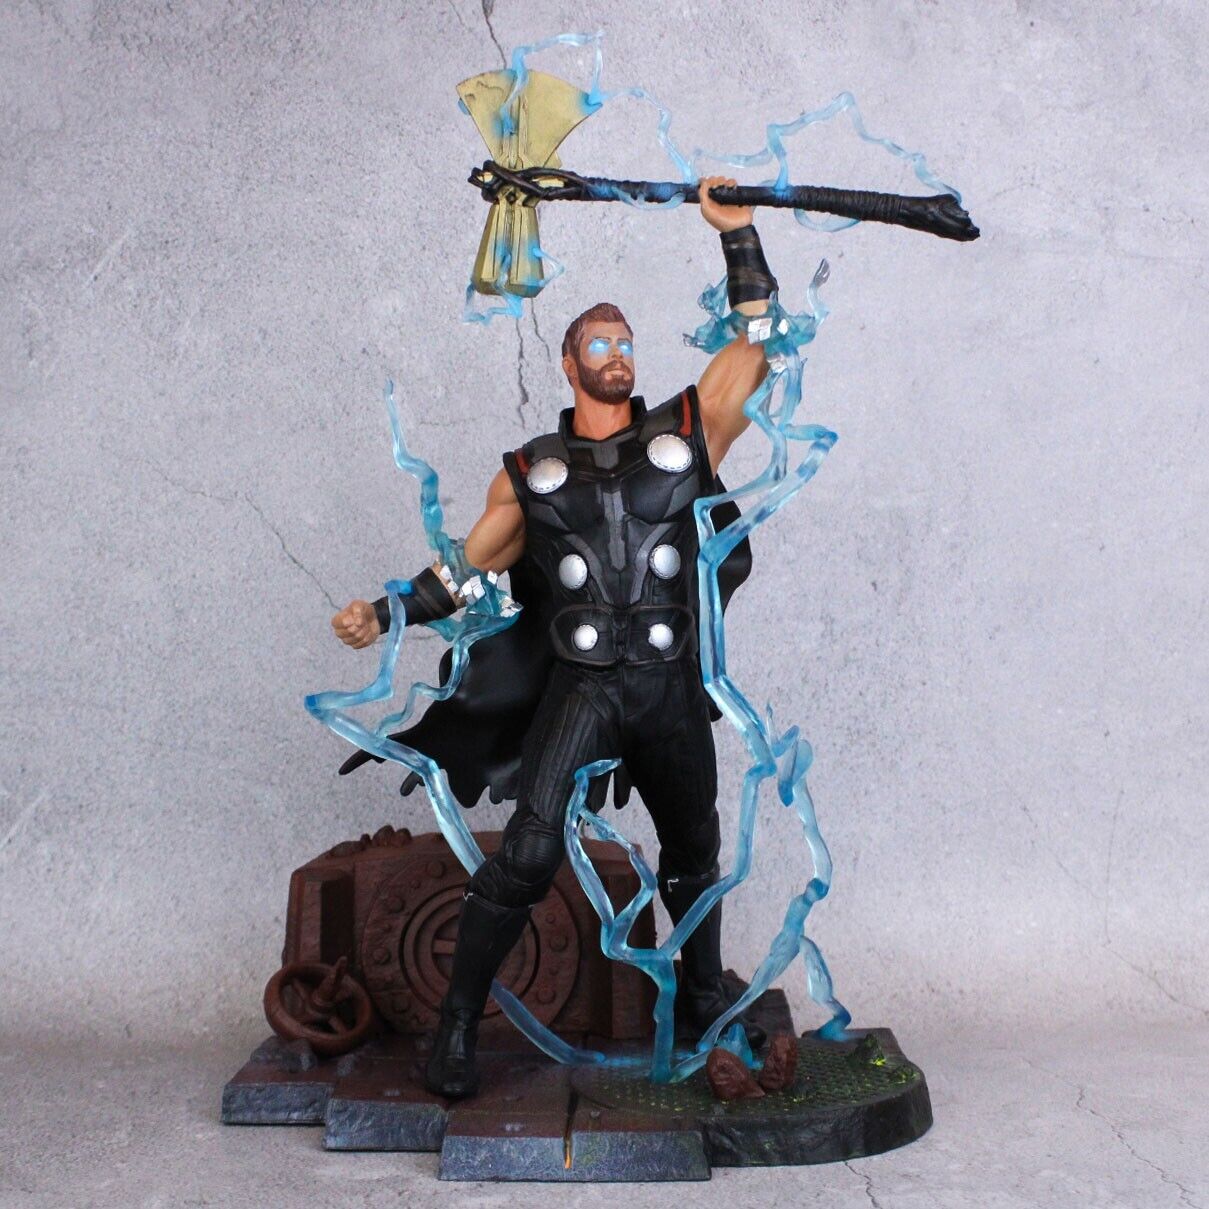 Thor with Stormbreaker Axe (Avengers: Infinity War) Marvel Gallery Statue